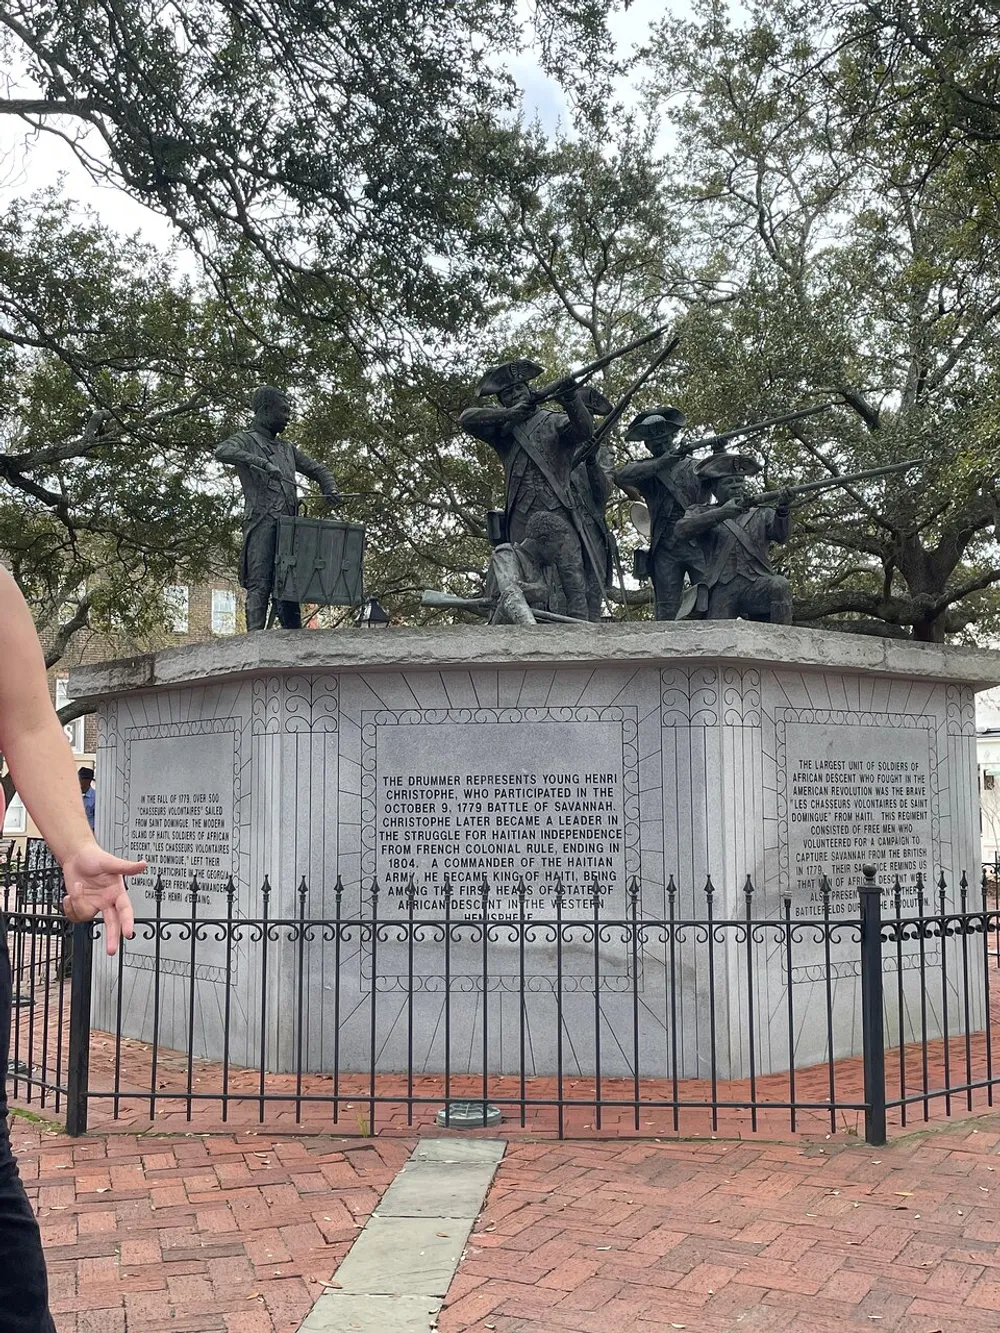 The image shows a monument with figures of historical significance along with a descriptive plaque and a partial view of a persons arm and hand set against a backdrop of trees and brick pavement